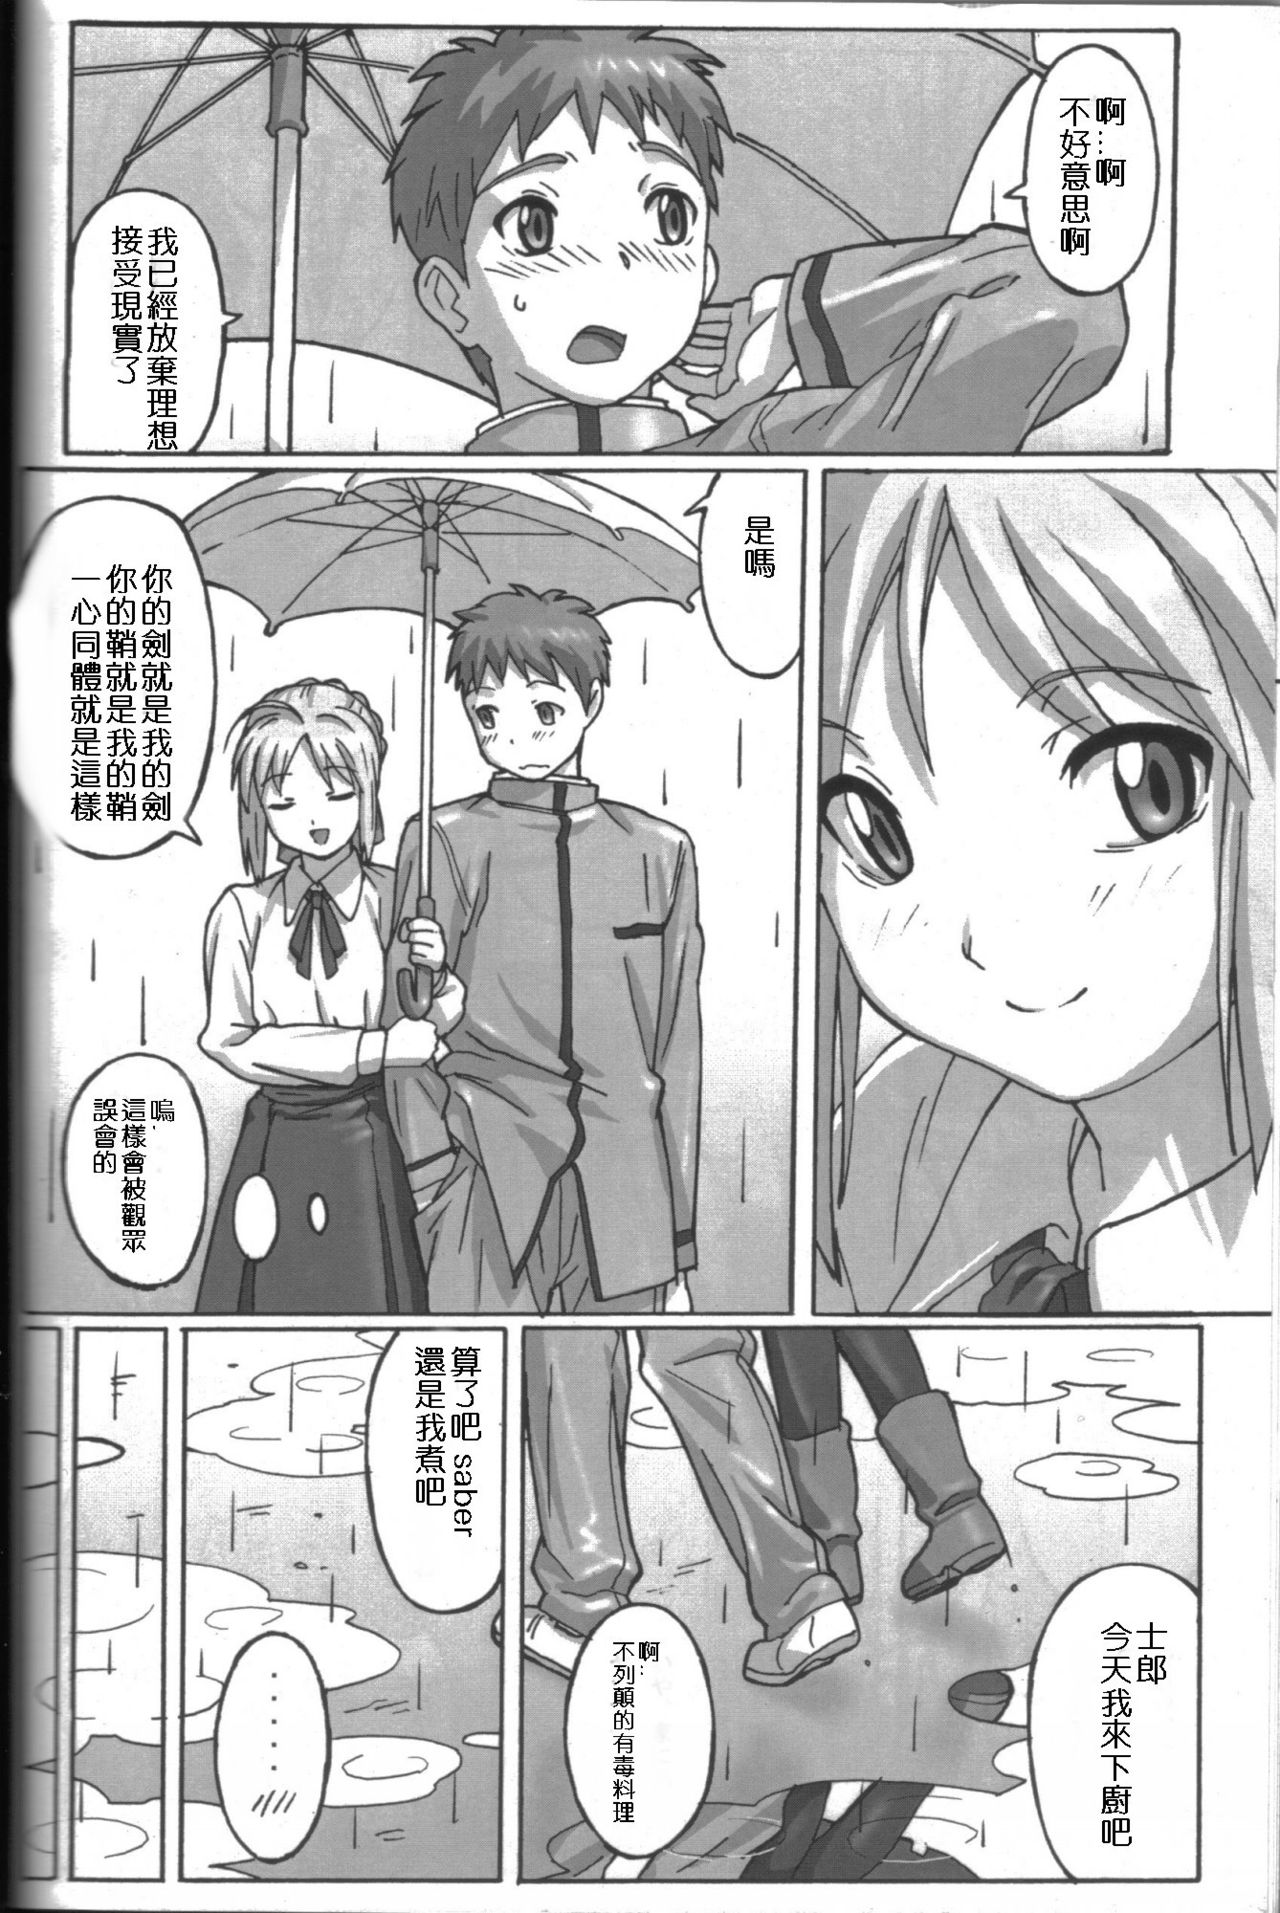 A PIECE OF CAKE [Chinese] [Rewrite] [煉鋼車間漢化組] page 10 full